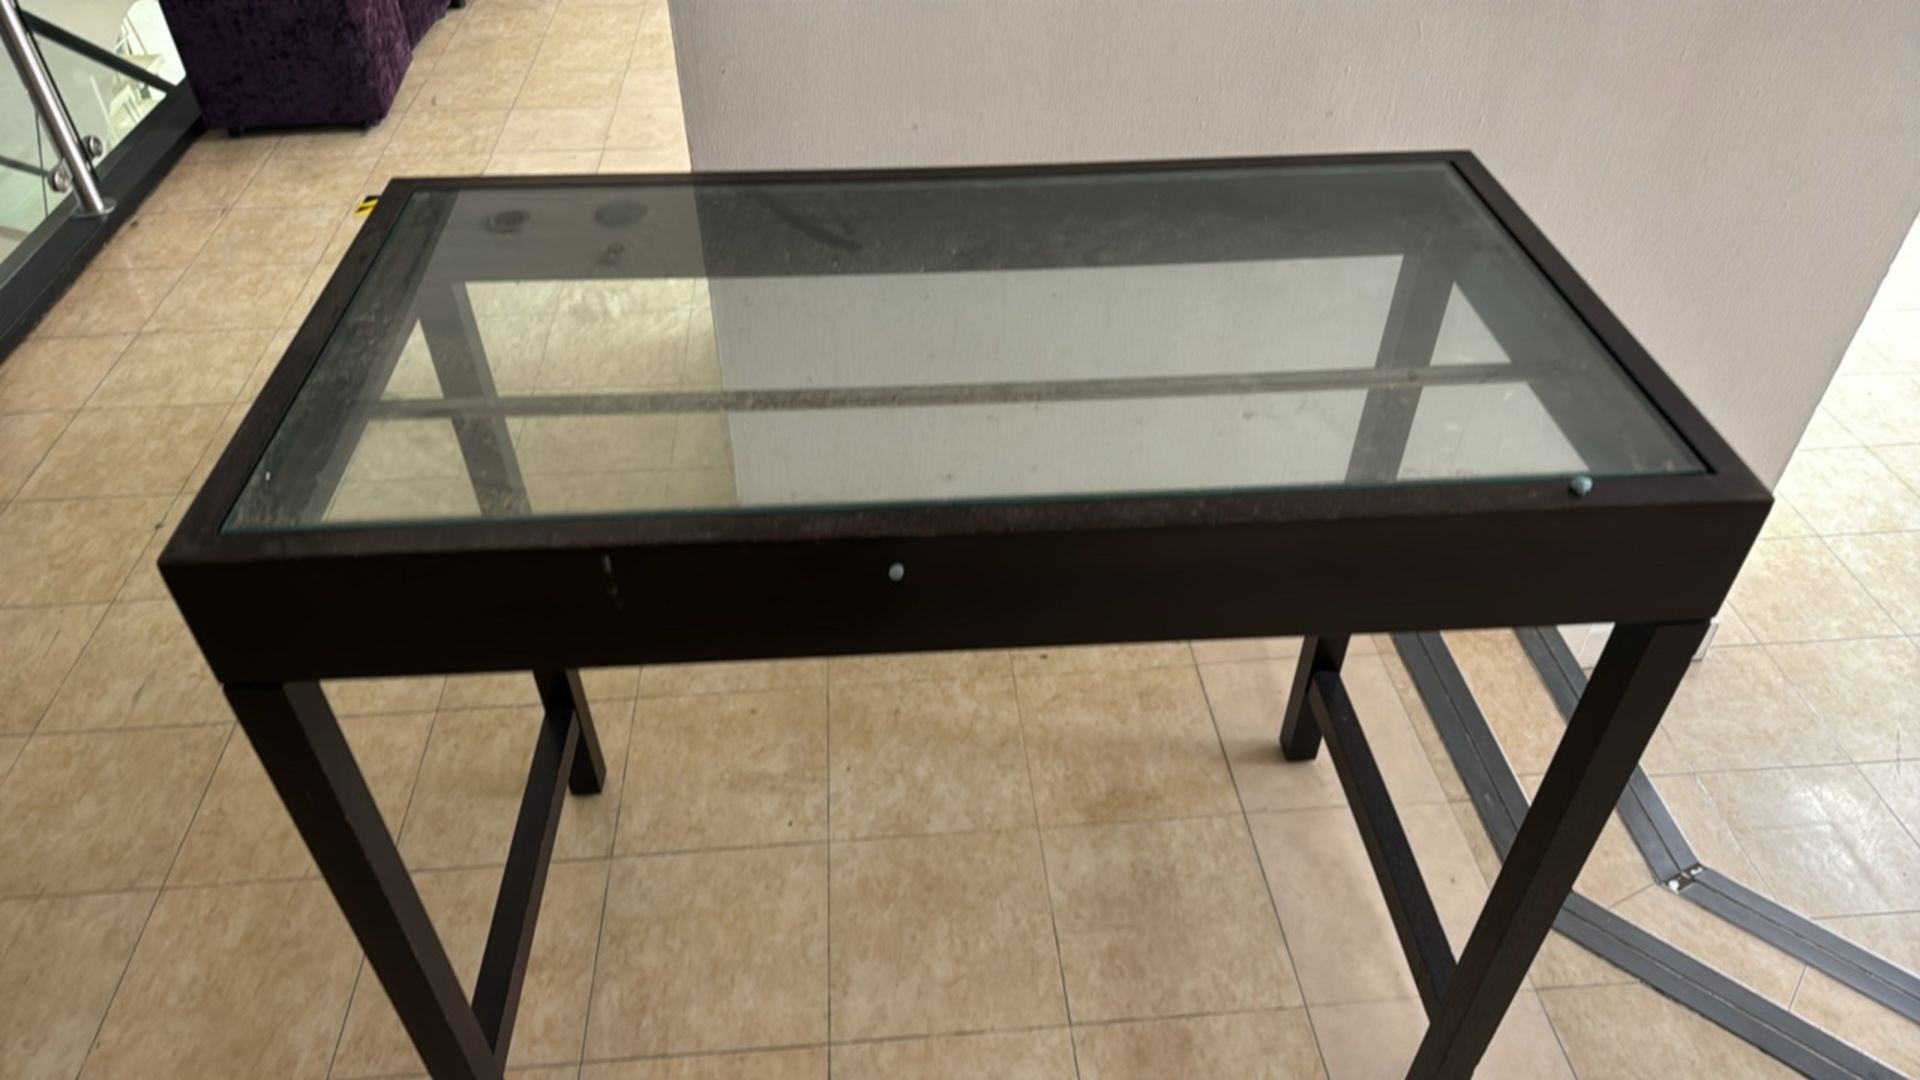 Wooden Table With Glass Top - Image 2 of 4